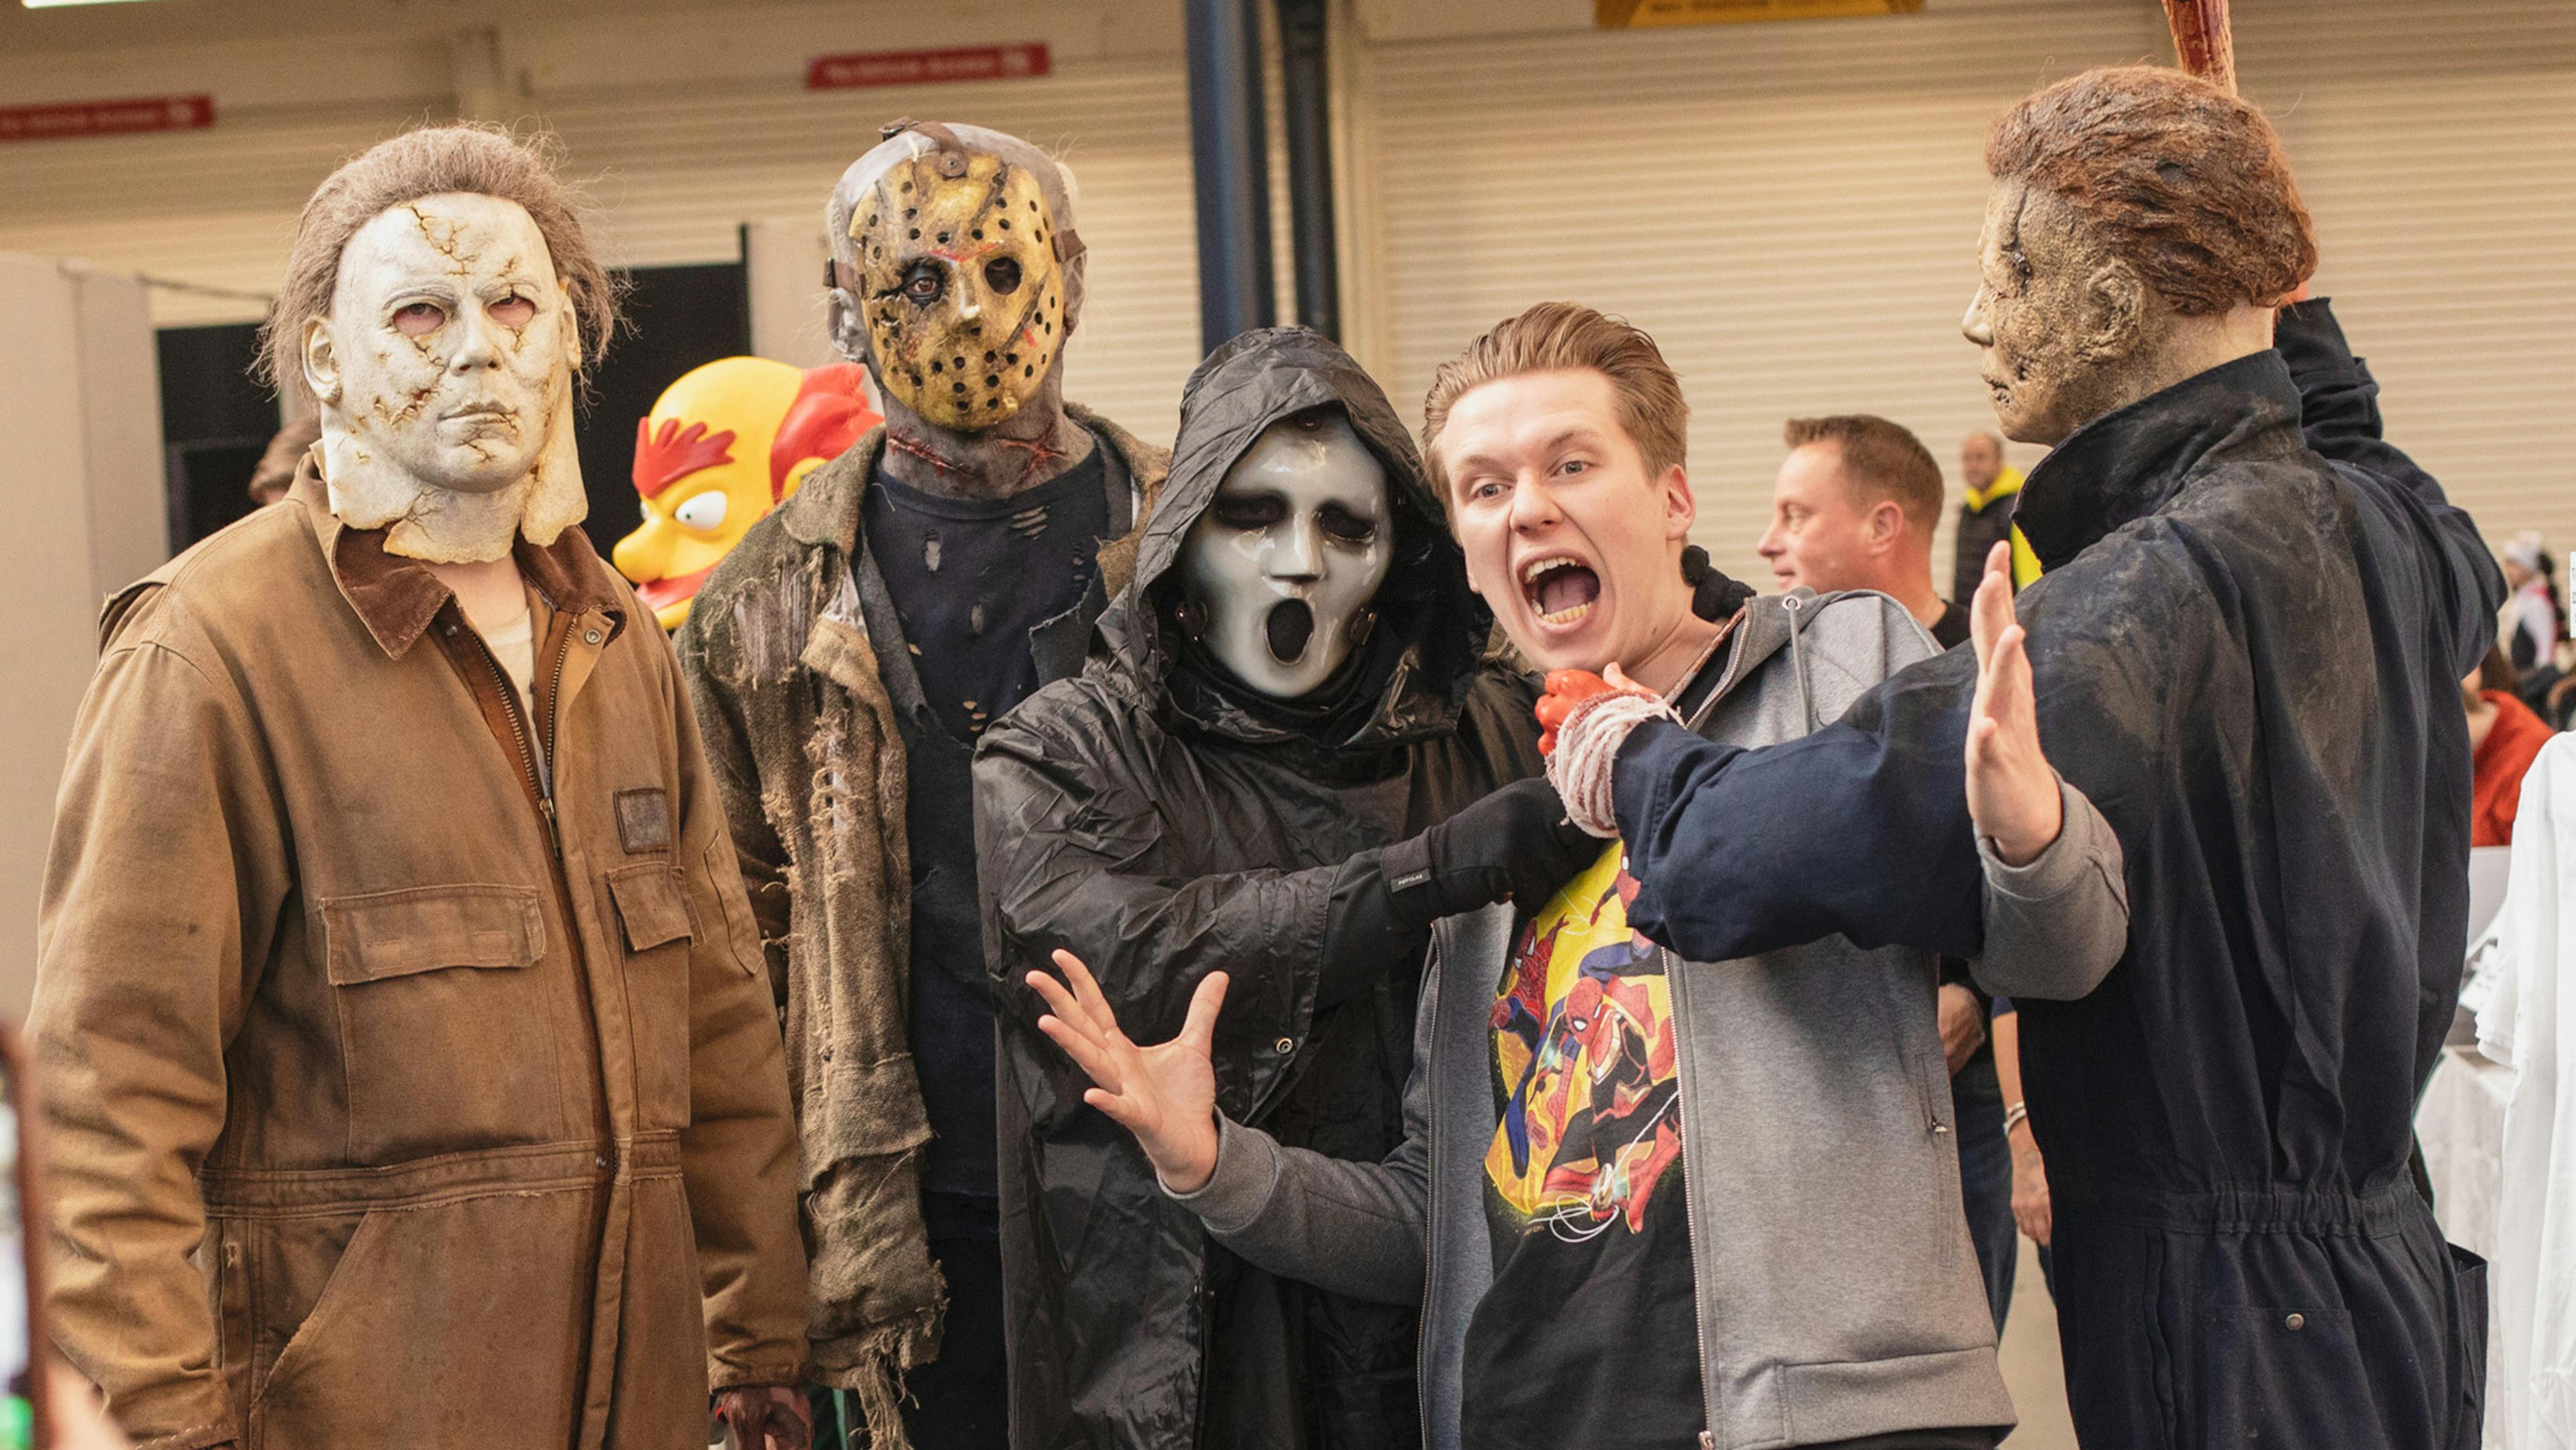 “What’s not fun about getting to dress up?!”: Inside London Comic Con Spring